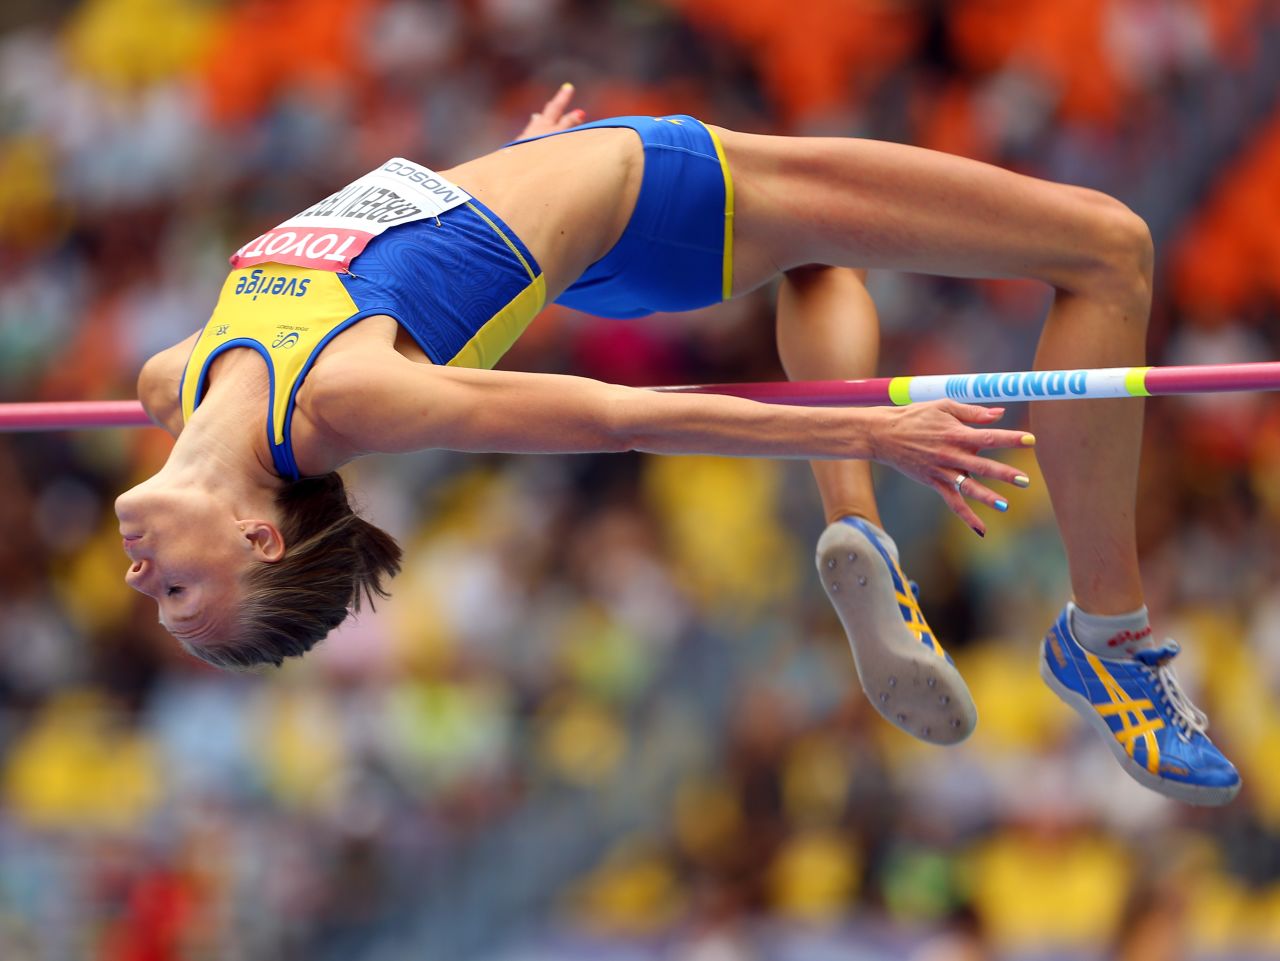 Isinbayeva criticized Swedish athletes Emma Green Tregaro (pictured) and Mao Hjelmer for sporting rainbow-colored fingernails in support of the gay rights movement during their events in the Russian capital.